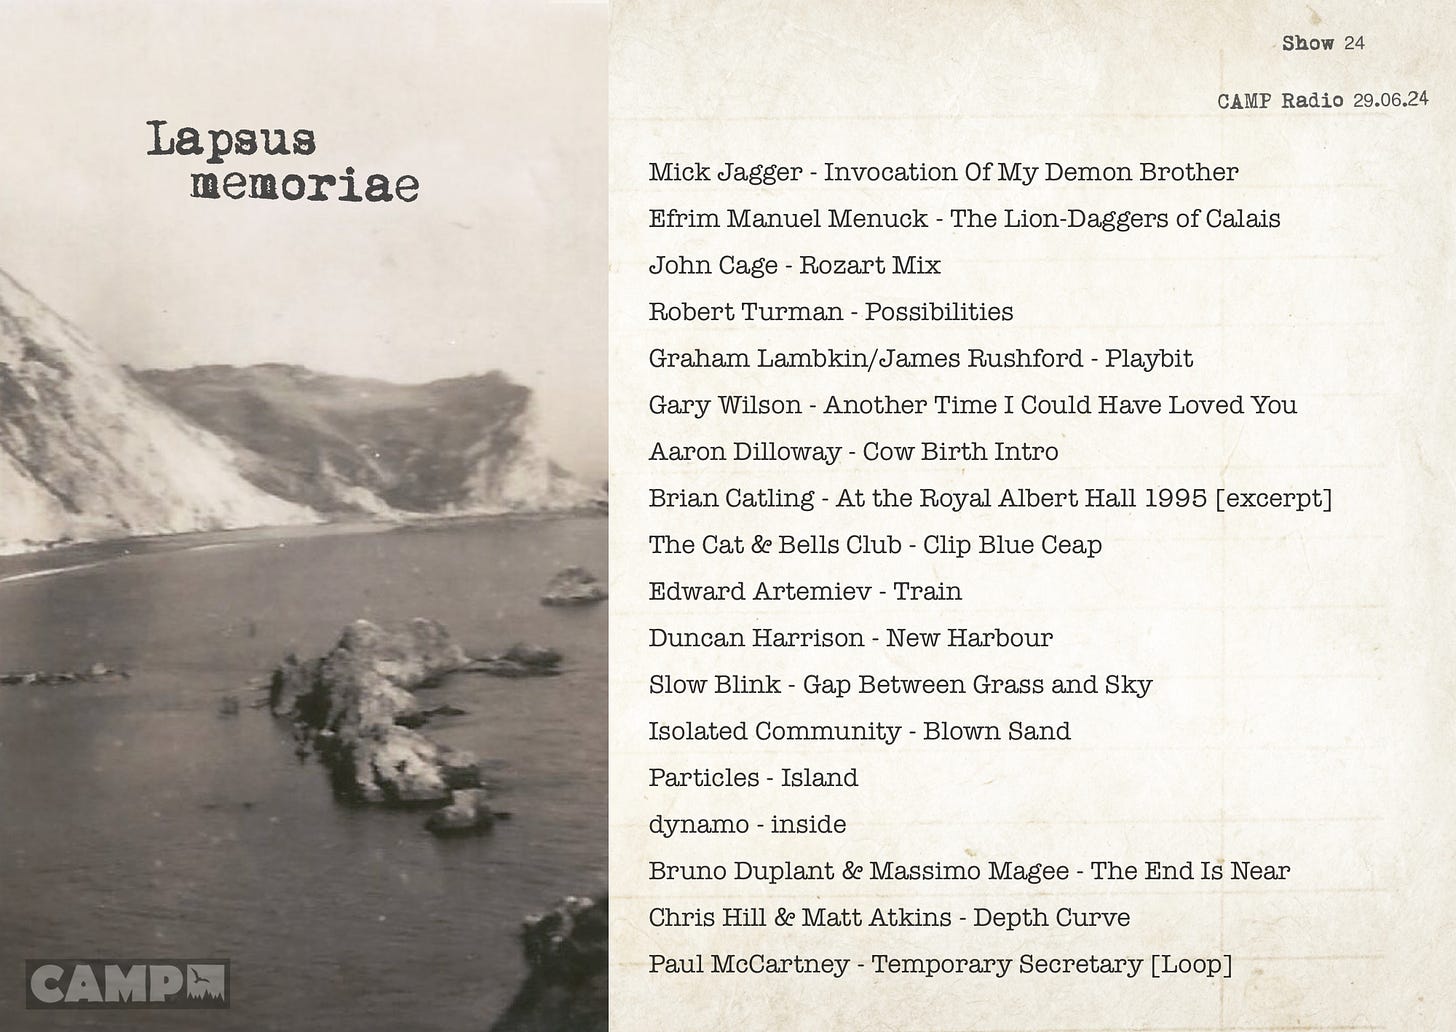 The track list for the Lapsus memoriae show aired on 29 June 2024.